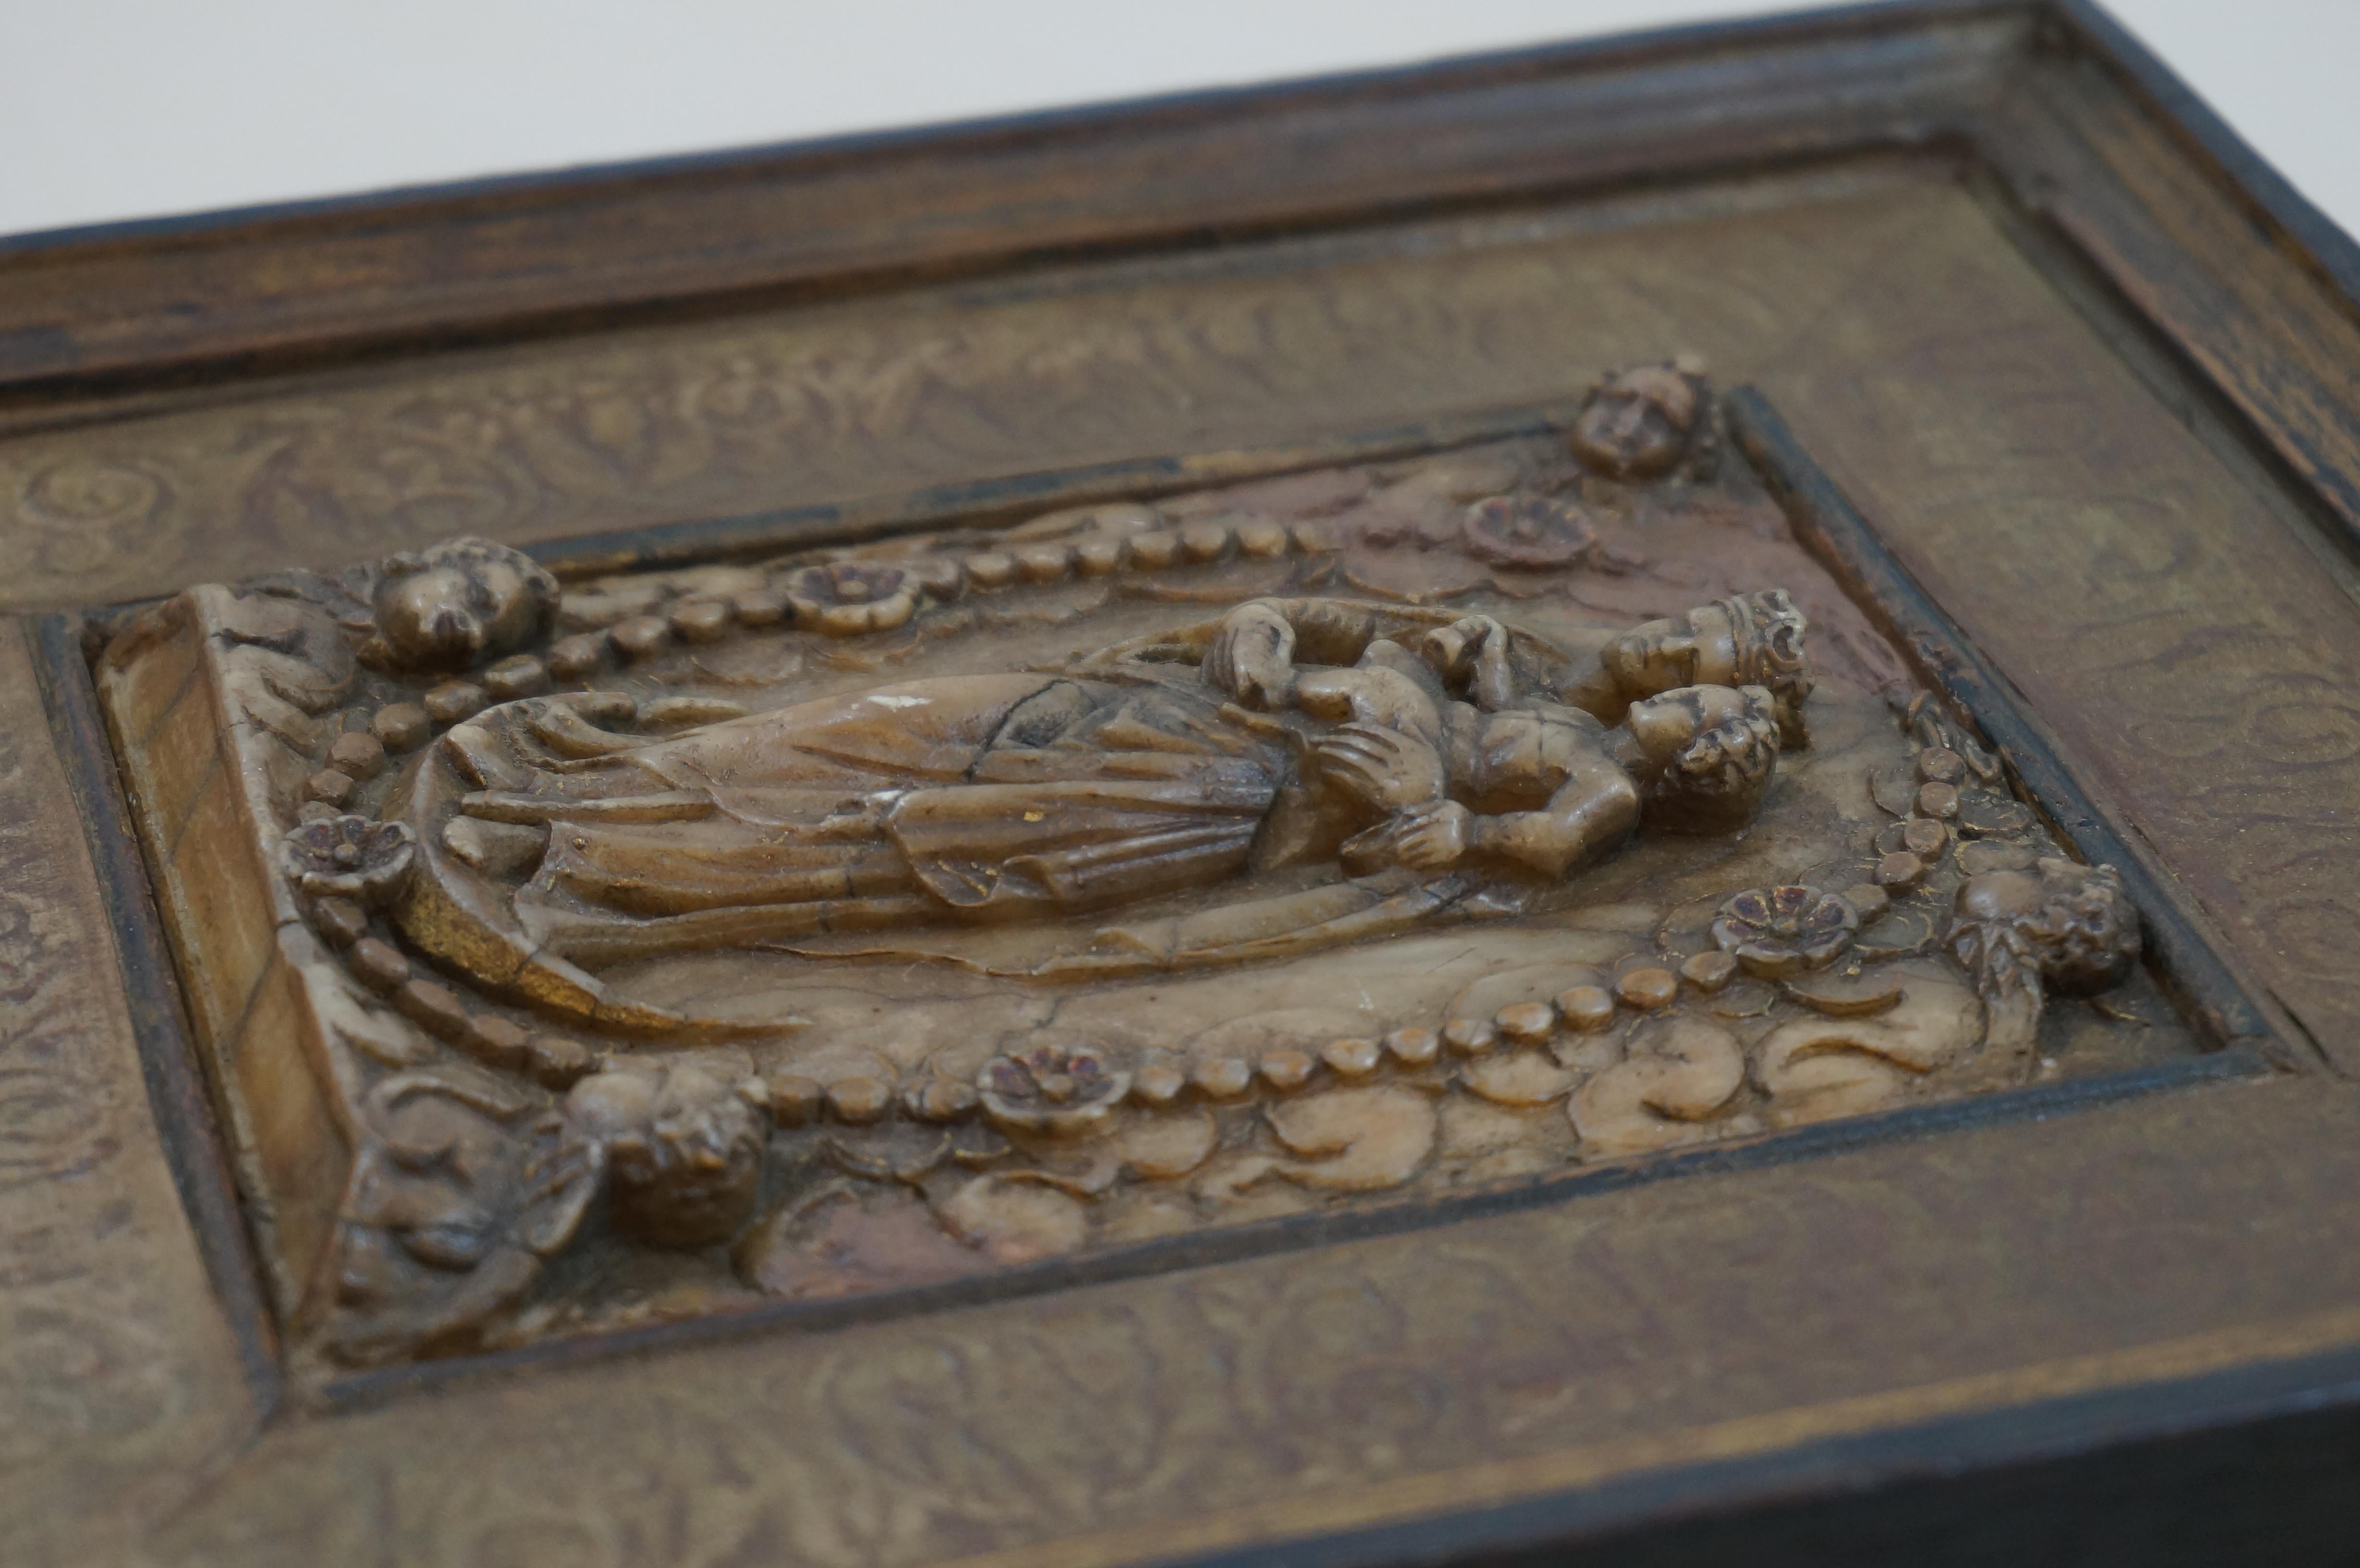  Antique alabaster relief, St. Mary of the Rosary, Belgium Malines, early 17th c 12